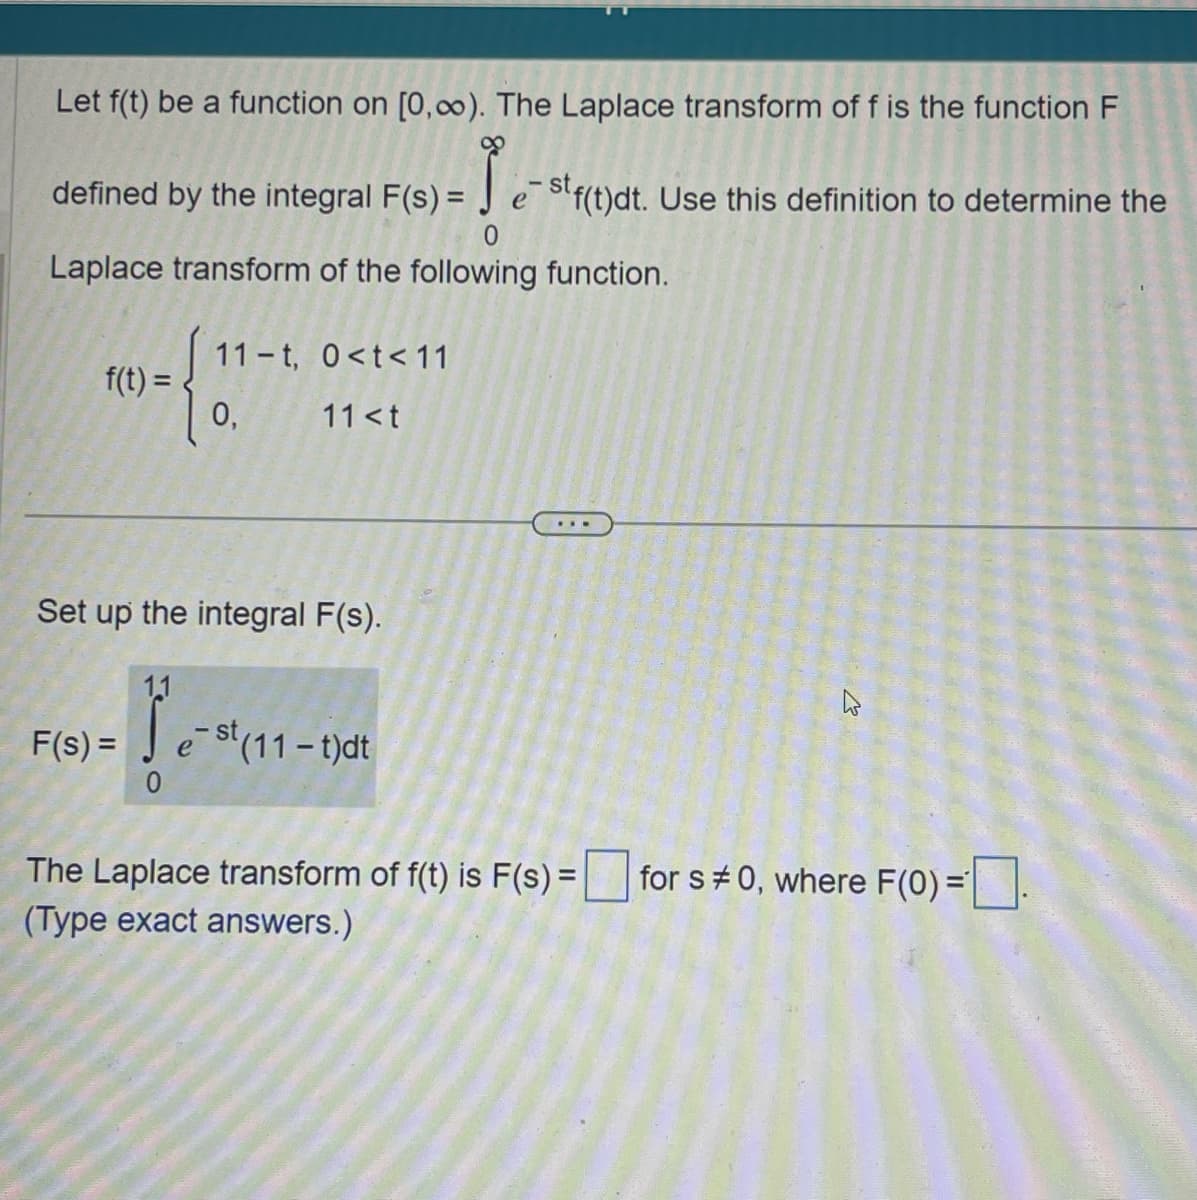 Let f(t) be a function on [0,∞). The Laplace transform of f is the function F
defined by the integral F(s) = est f(t)dt. Use this definition to determine the
0
Laplace transform of the following function.
11 t, 0<t<11
f(t) =
0,
11 <t
Set up the integral F(s).
11
F(s) =
e-st (11-t)dt
0
The Laplace transform of f(t) is F(s) =
(Type exact answers.)
for s#0, where F(0) =